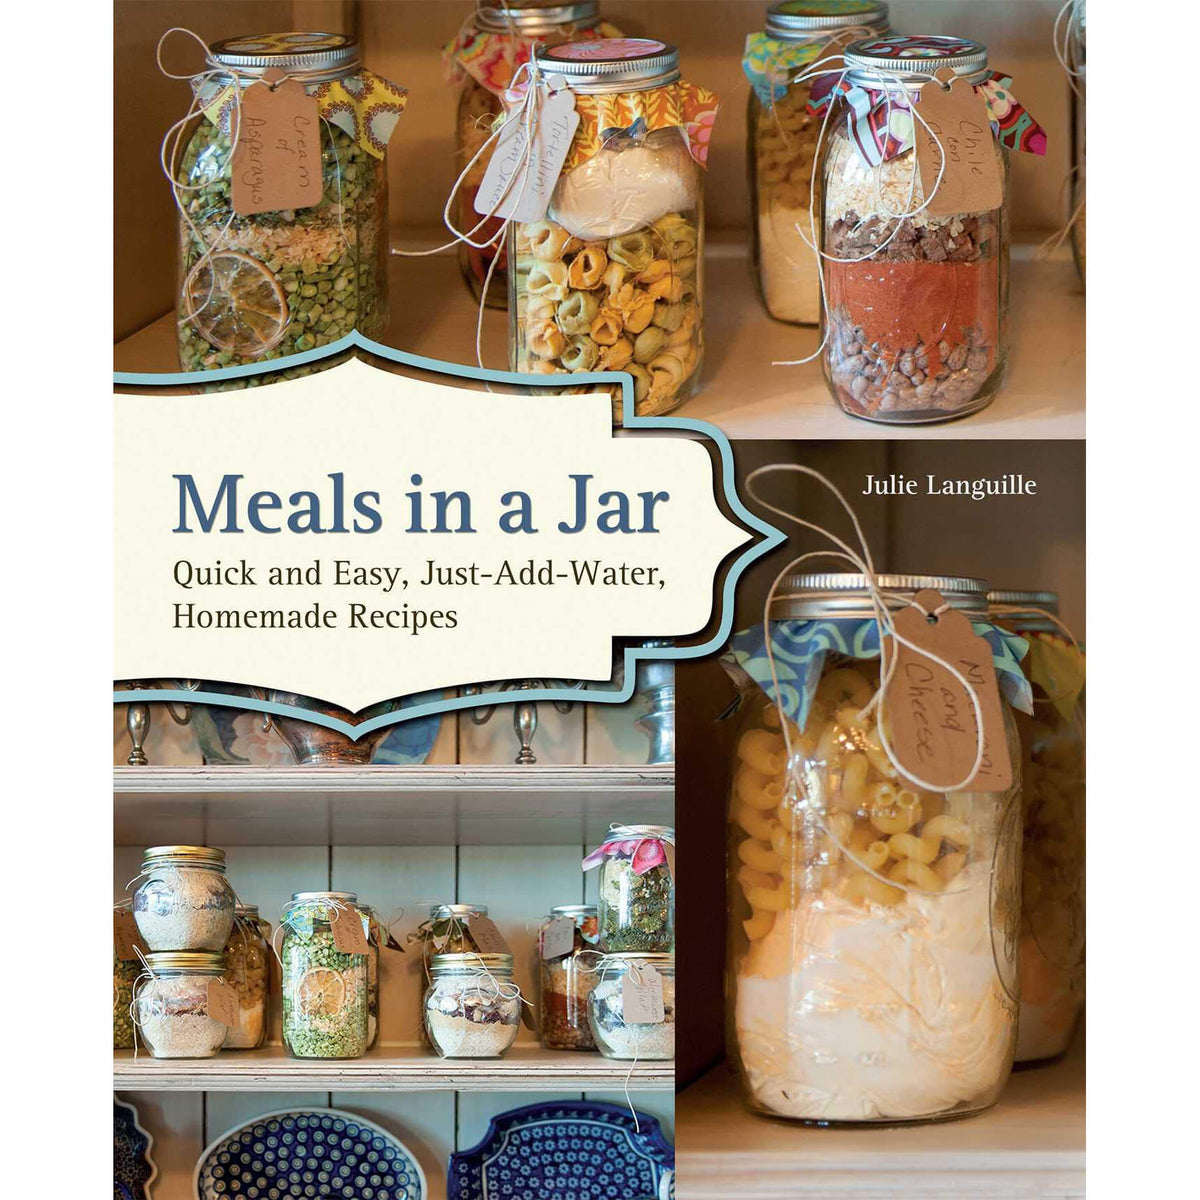 Meals in a Jar front cover.